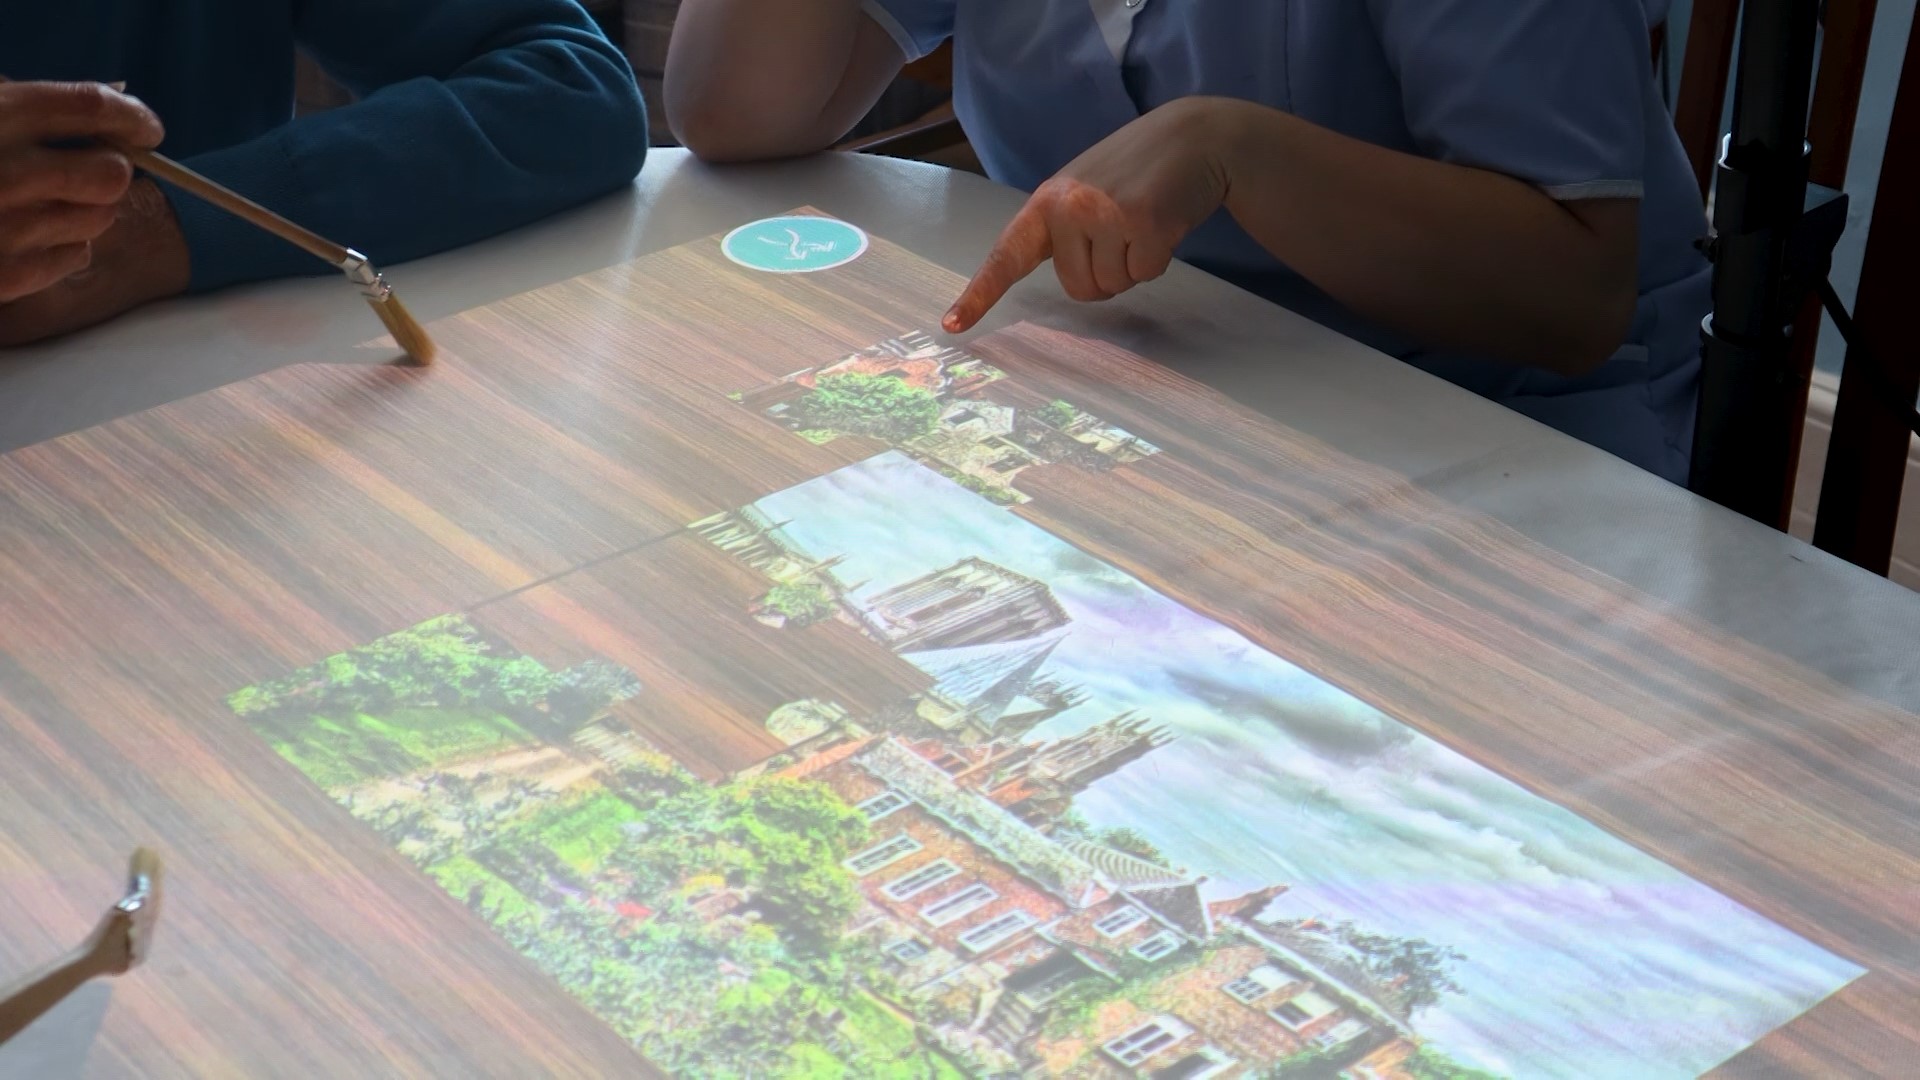 An interactive table with jigsaw activity, as the user touches the jigsaw pieces they fall into place, seated around the table is an elderly gentlemen with car provider.